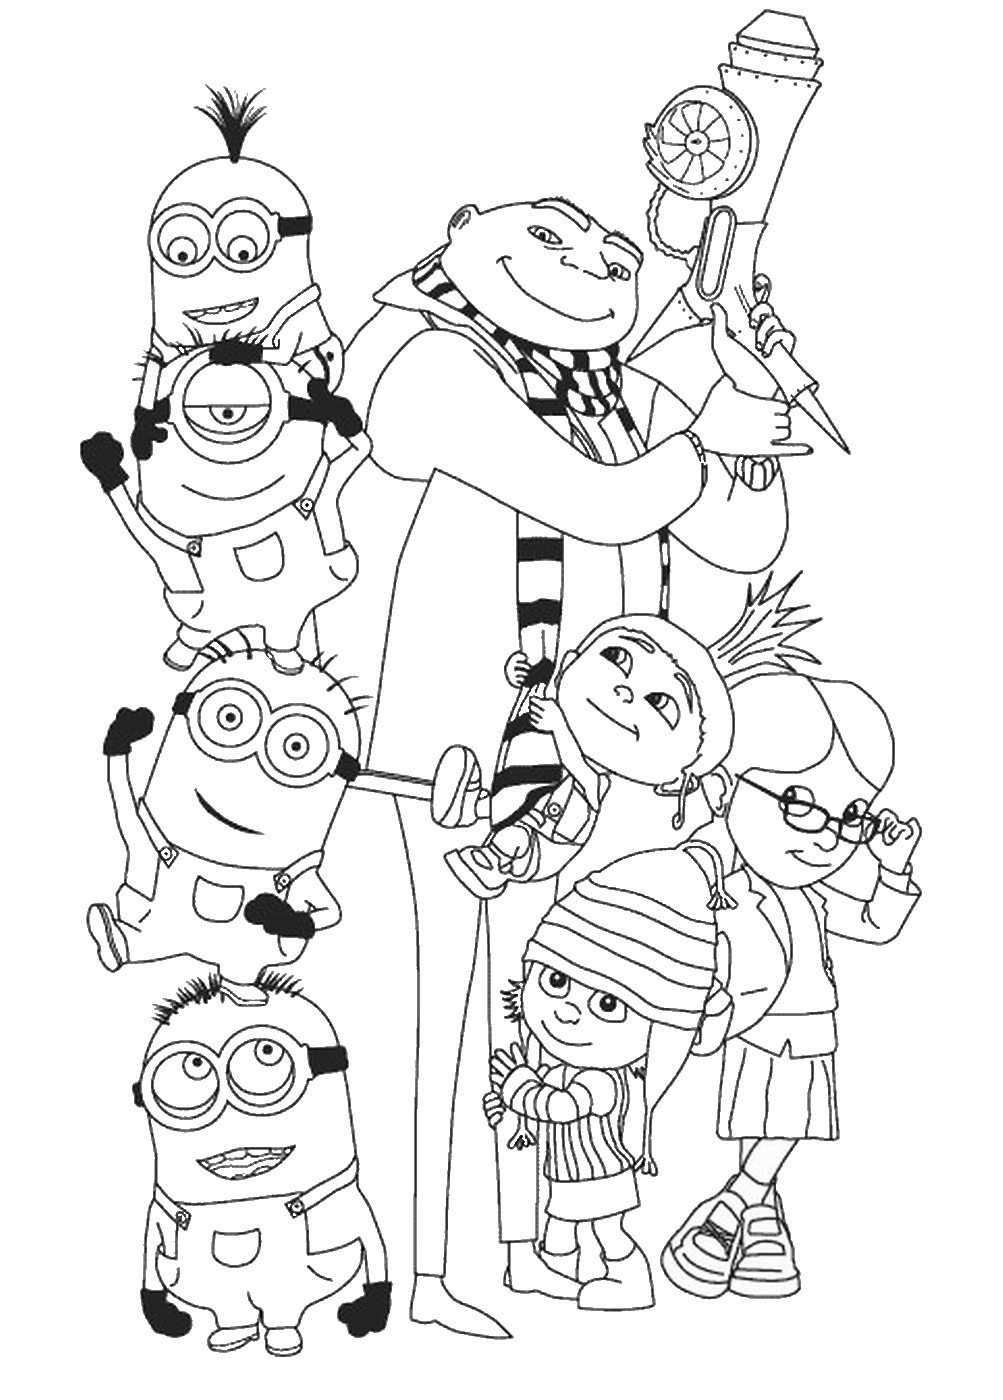 Minions From Despicable Me Coloring Page Free Printable Coloring Pages ...